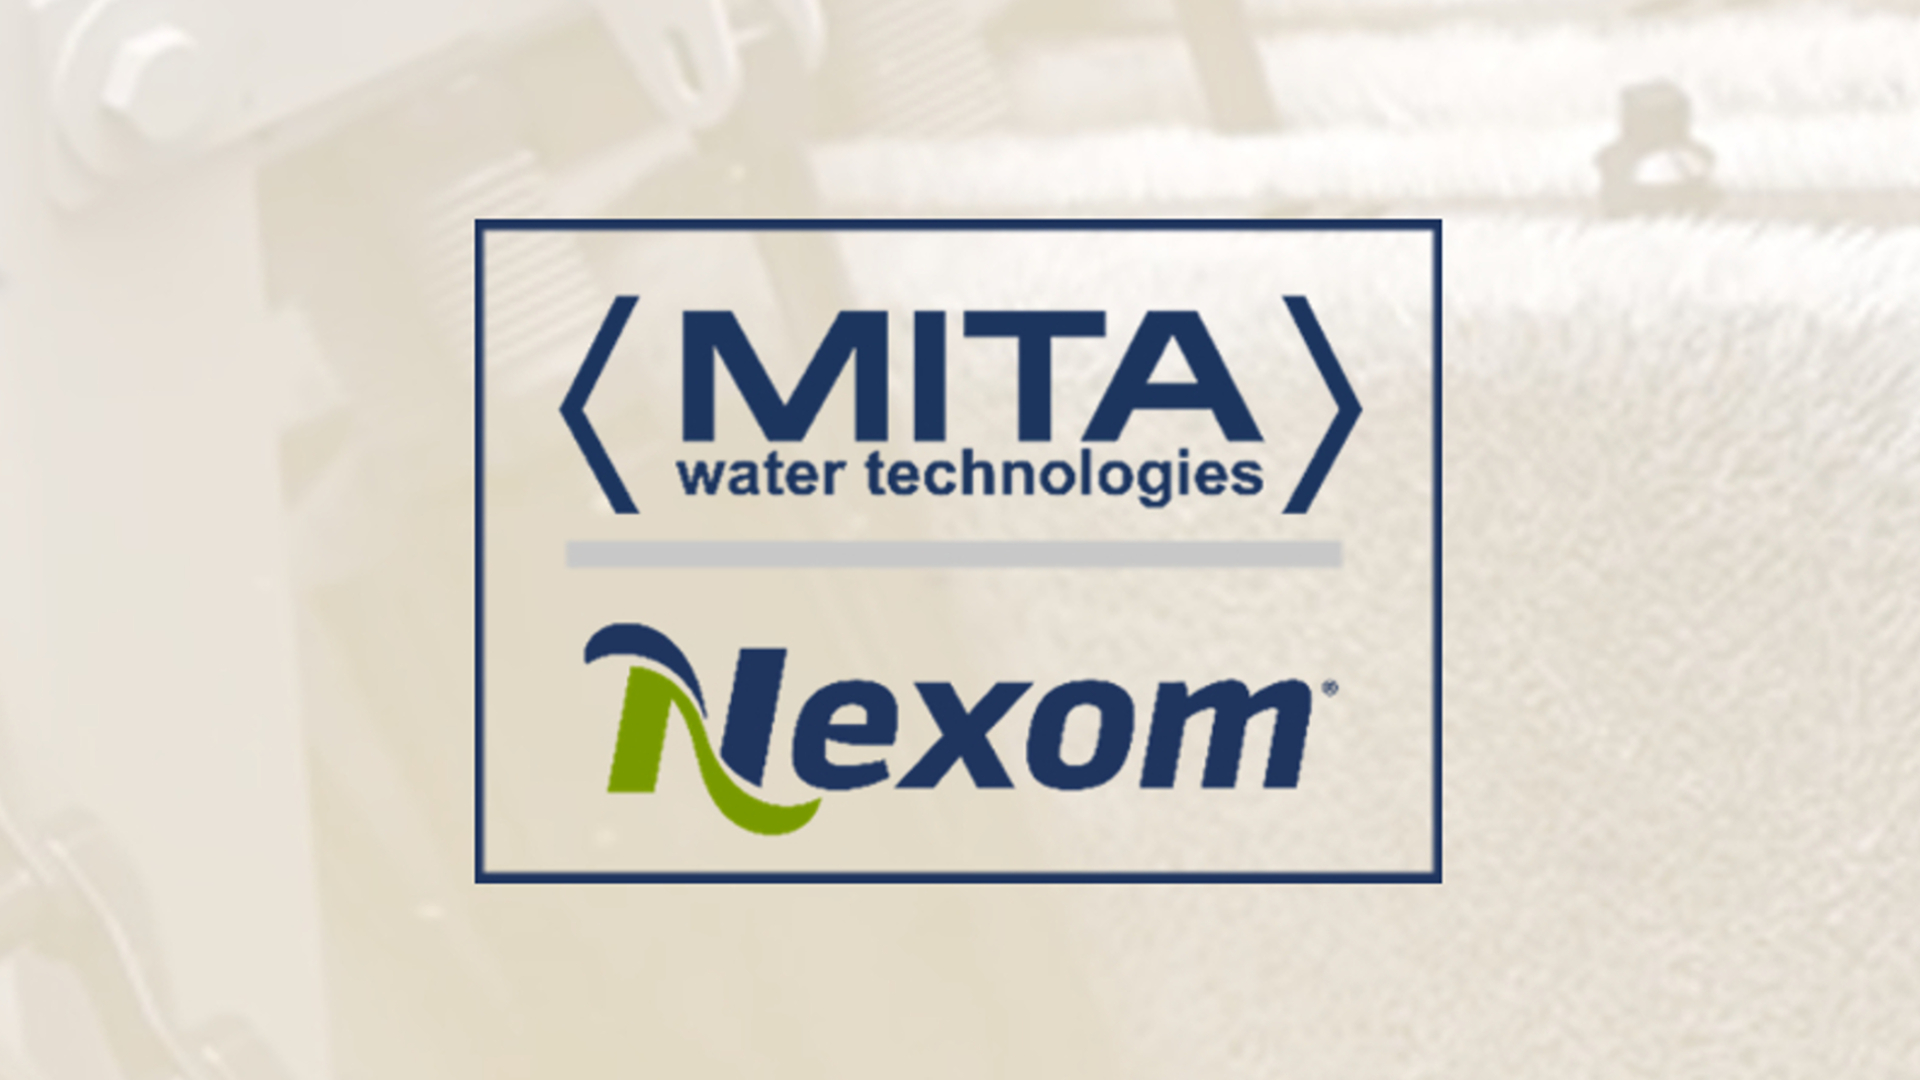 MITA signs agreement with Nexom for cloth filters - MITA Water